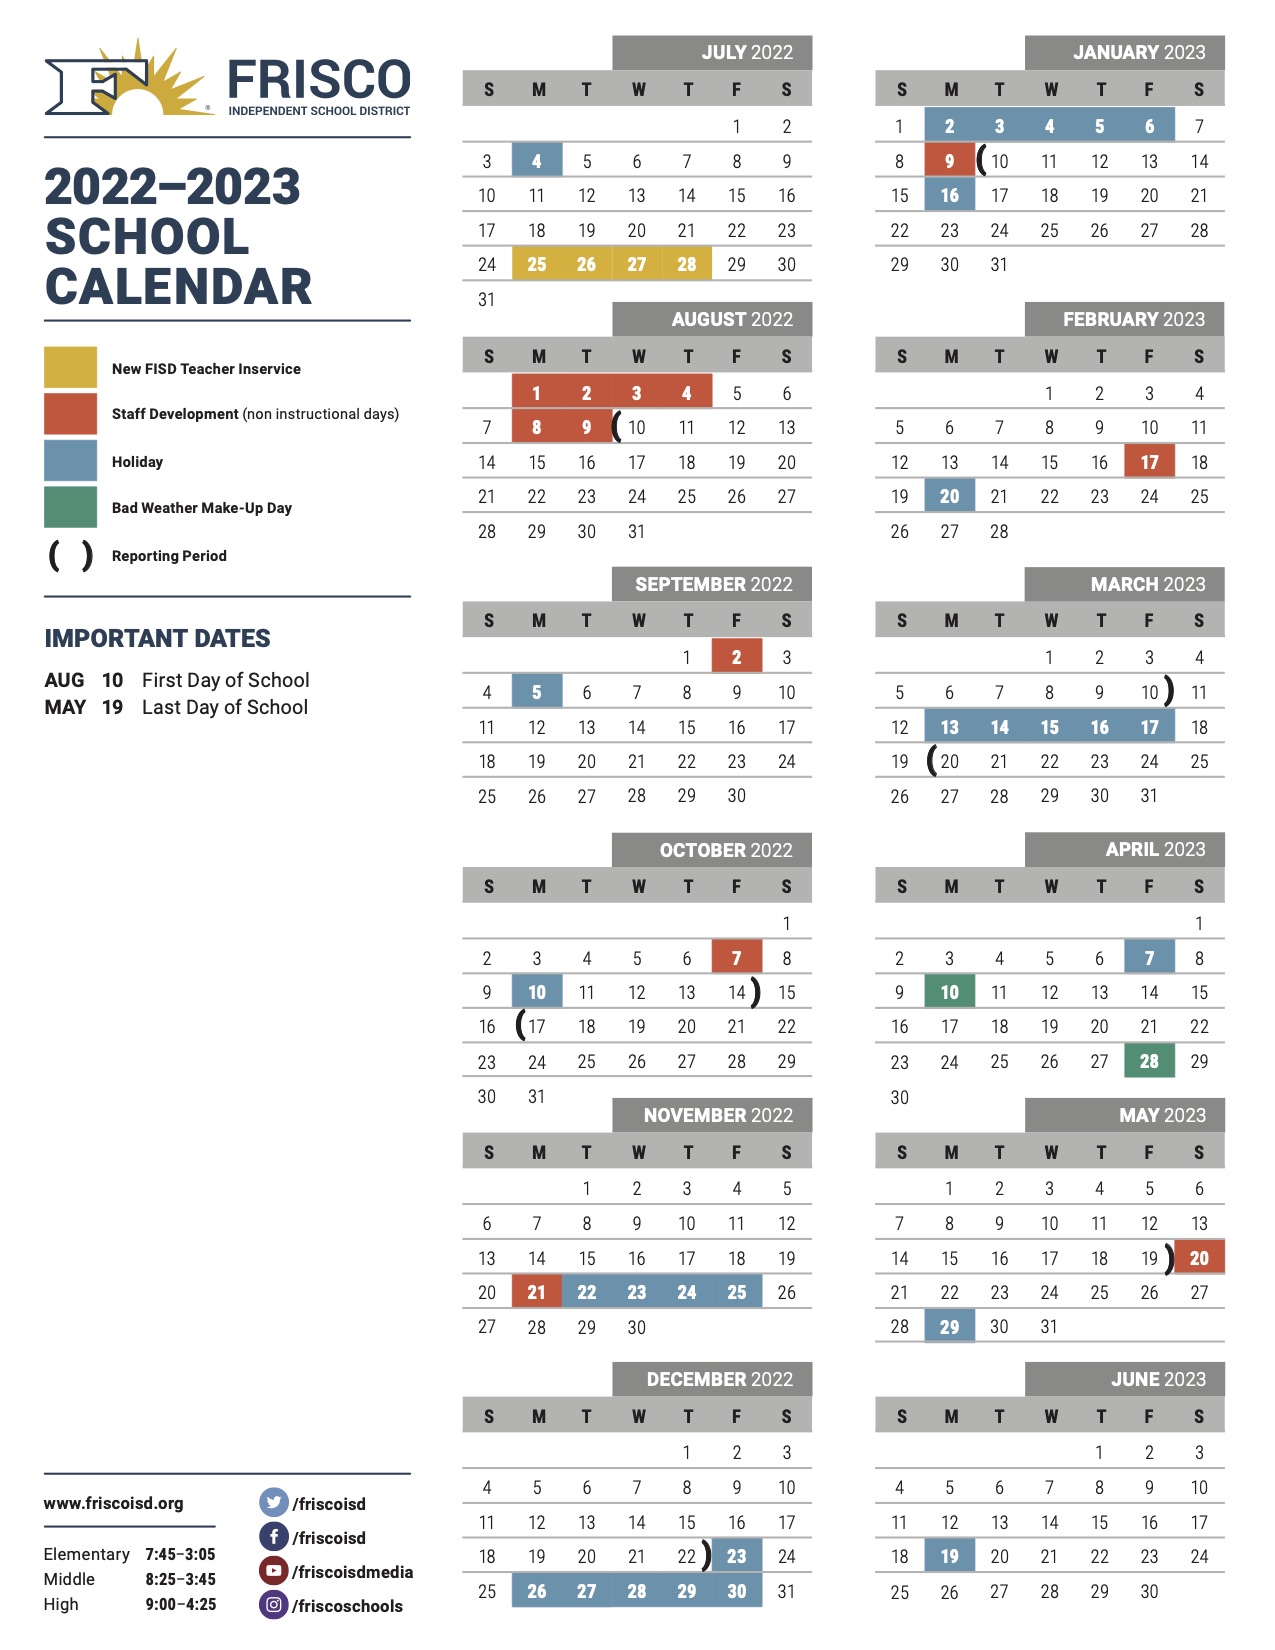 Fisd 2022 Calendar Frisco Isd On Twitter: "The Frisco Isd Academic Calendar Has Been Approved  For The 2022-23 School Year. Check Out Https://T.co/Jlvoekeccp For An  Overview Of The Calendar. Https://T.co/C8Gs8Lflru" / Twitter